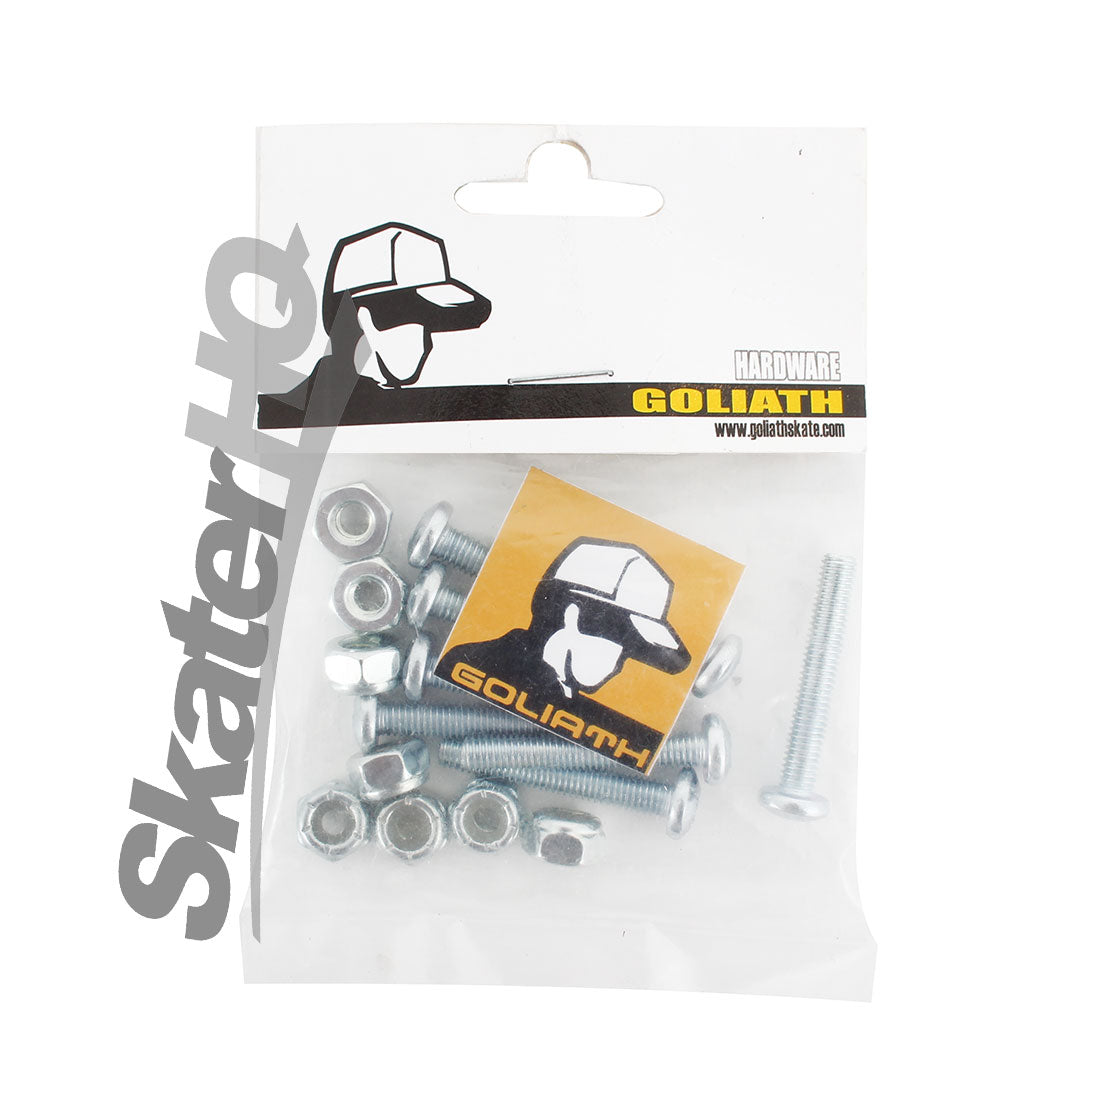 Goliath 1.25 Pan Head Phillip Bolts Skateboard Hardware and Parts